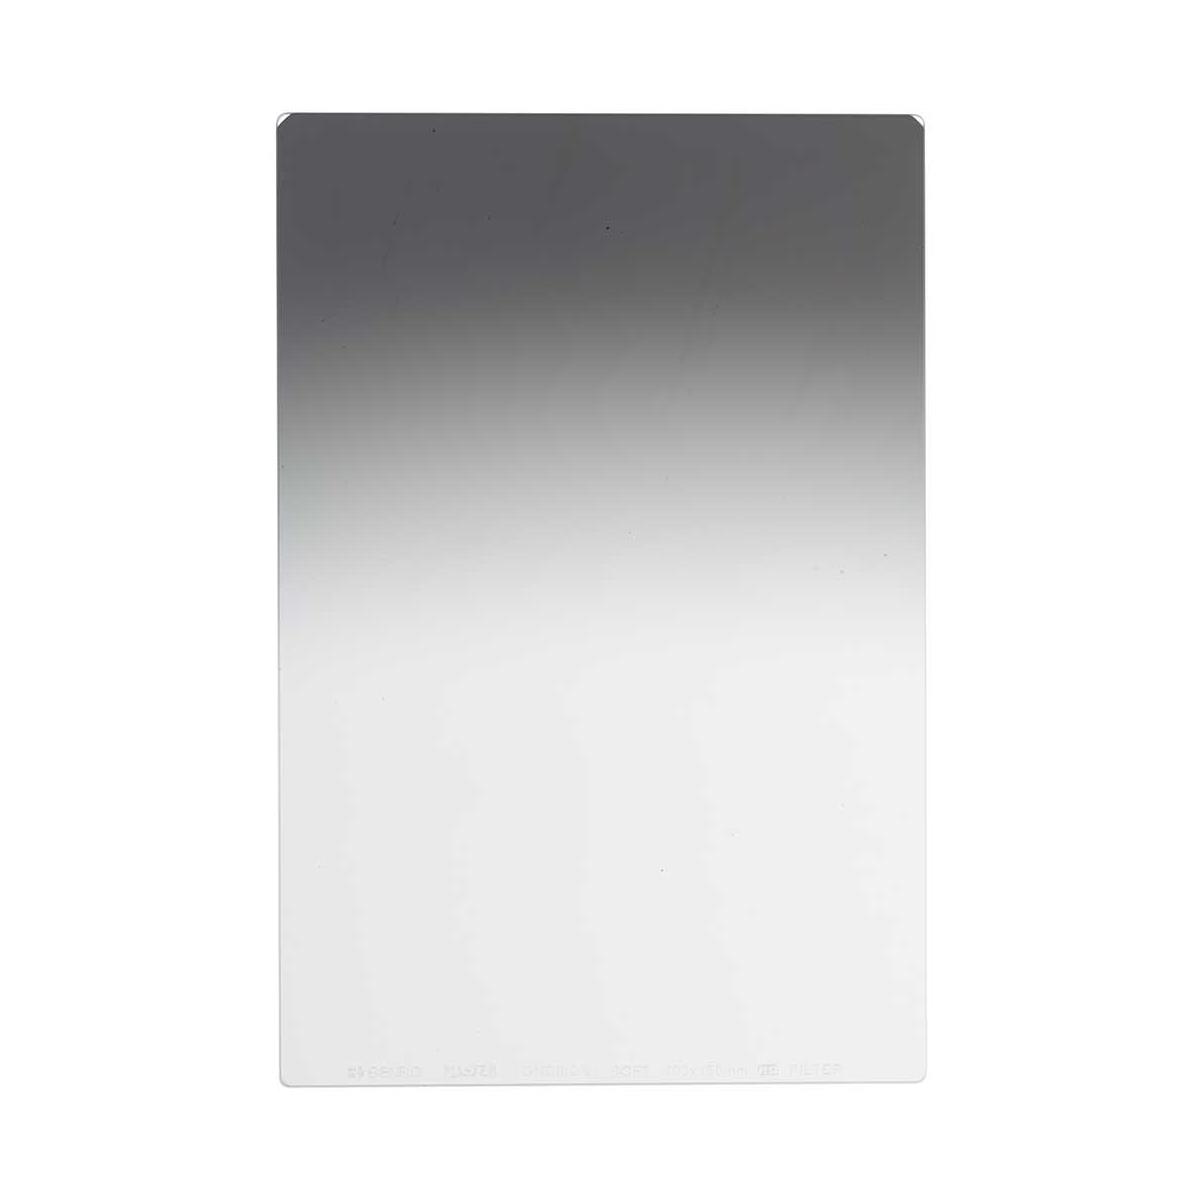 Image of Benro Master GND8 (0.9) 170x190mm Soft-Edged Graduated ND Filter